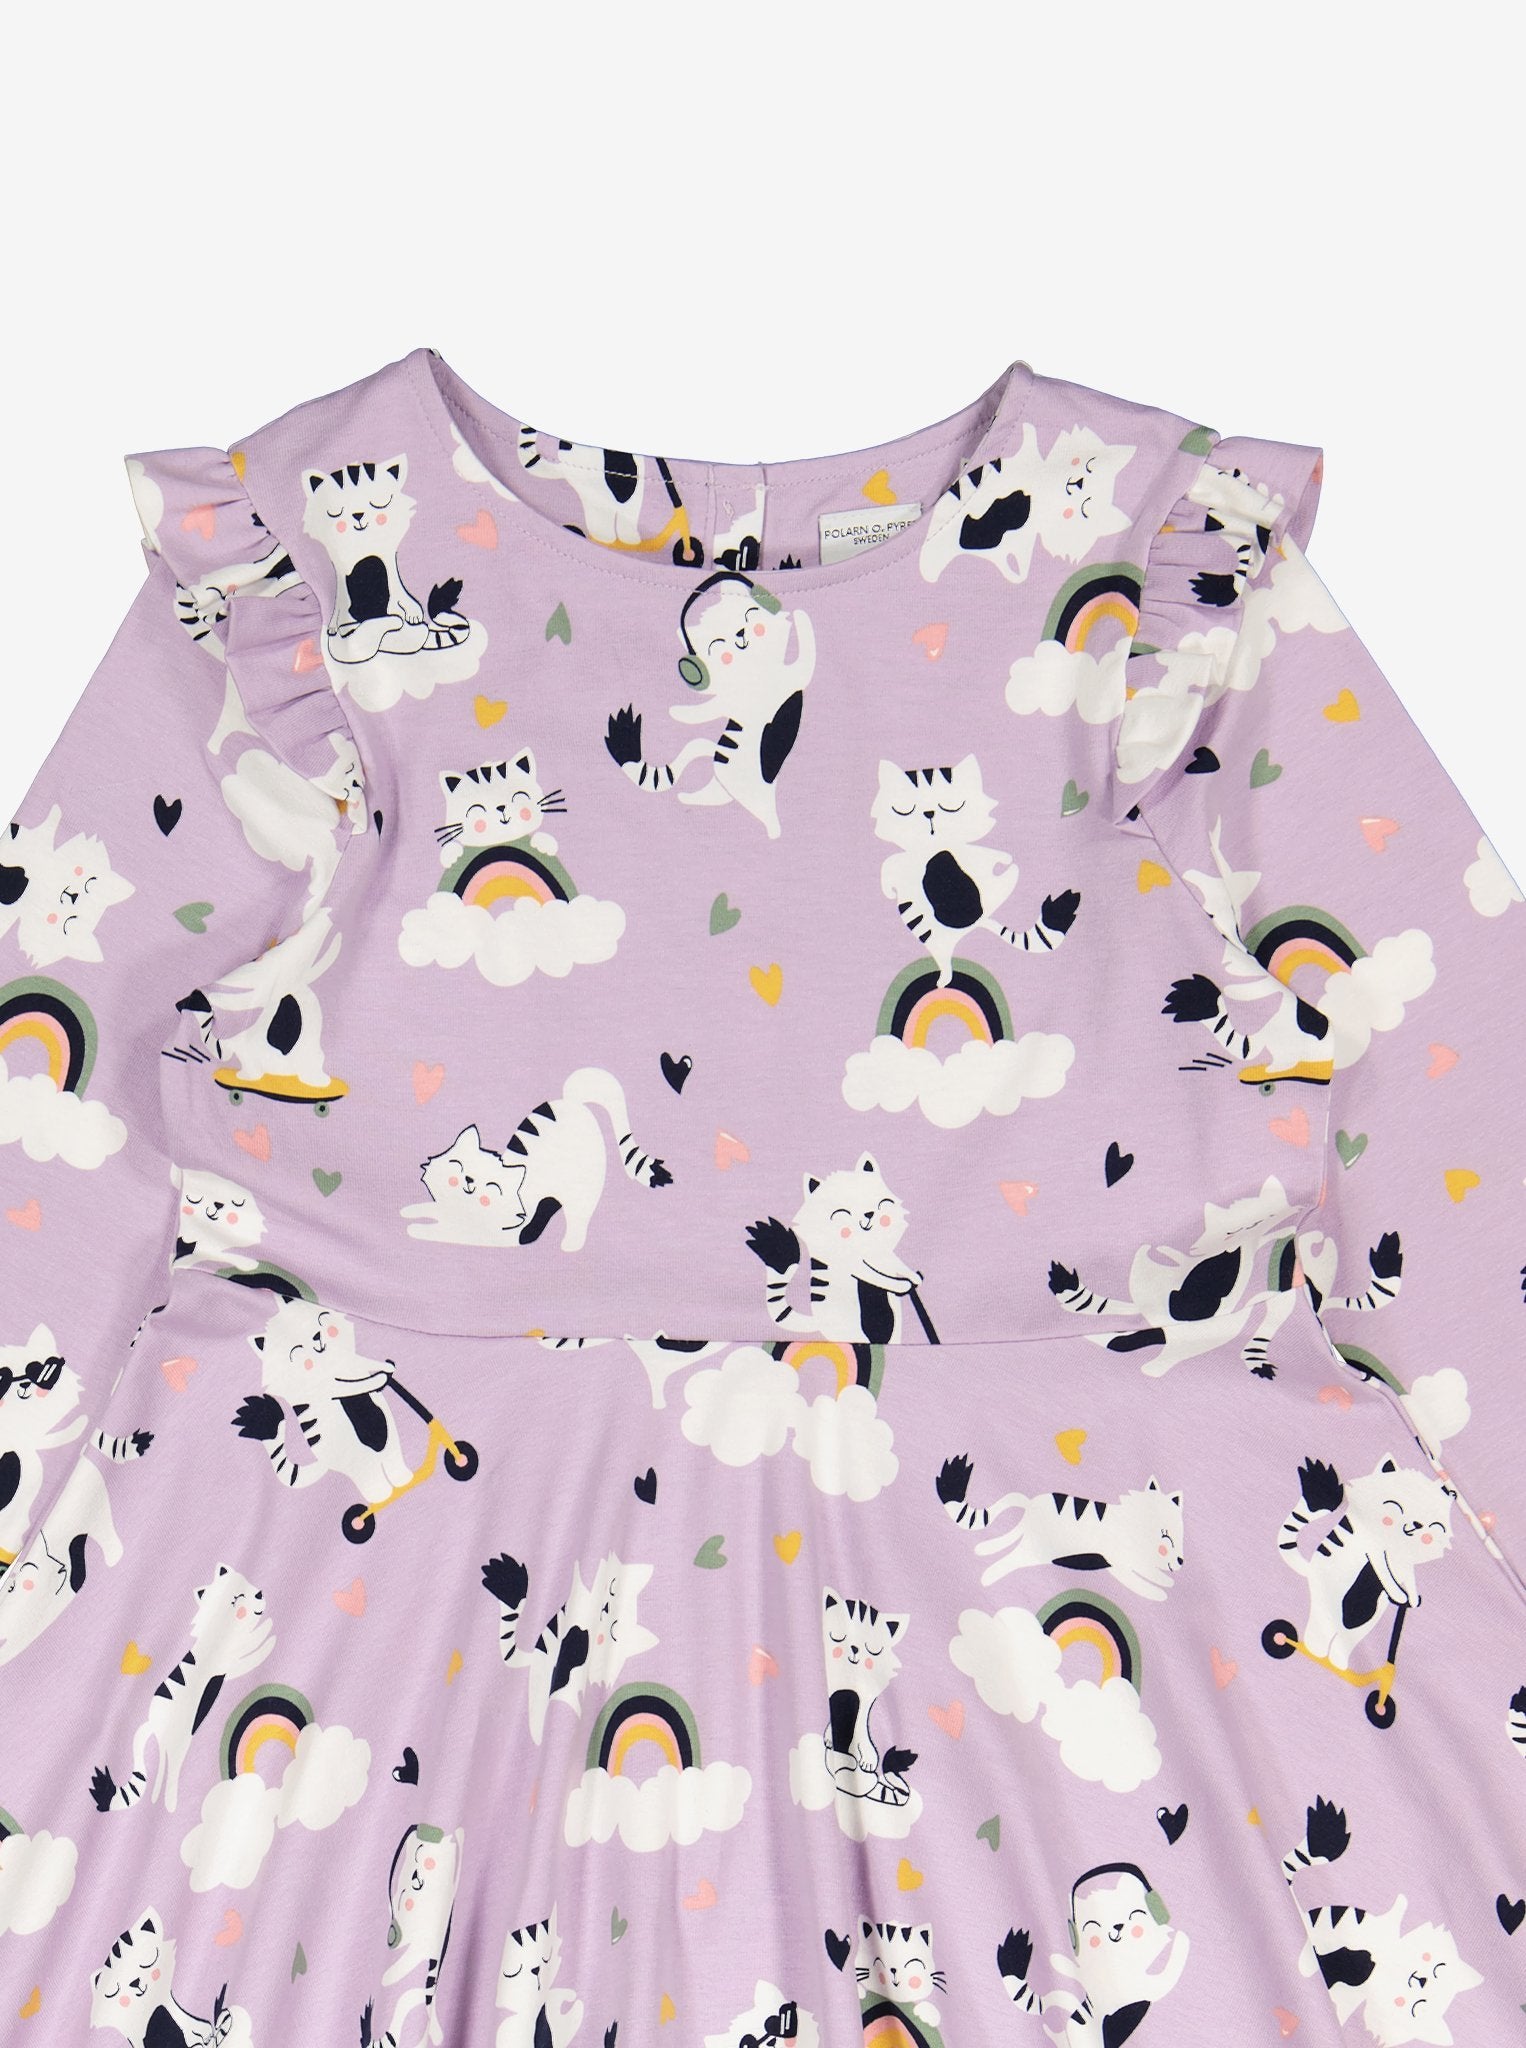  Organic Pink Cat Print Girls Dress from Polarn O. Pyret Kidswear. Made from eco-friendly materials.